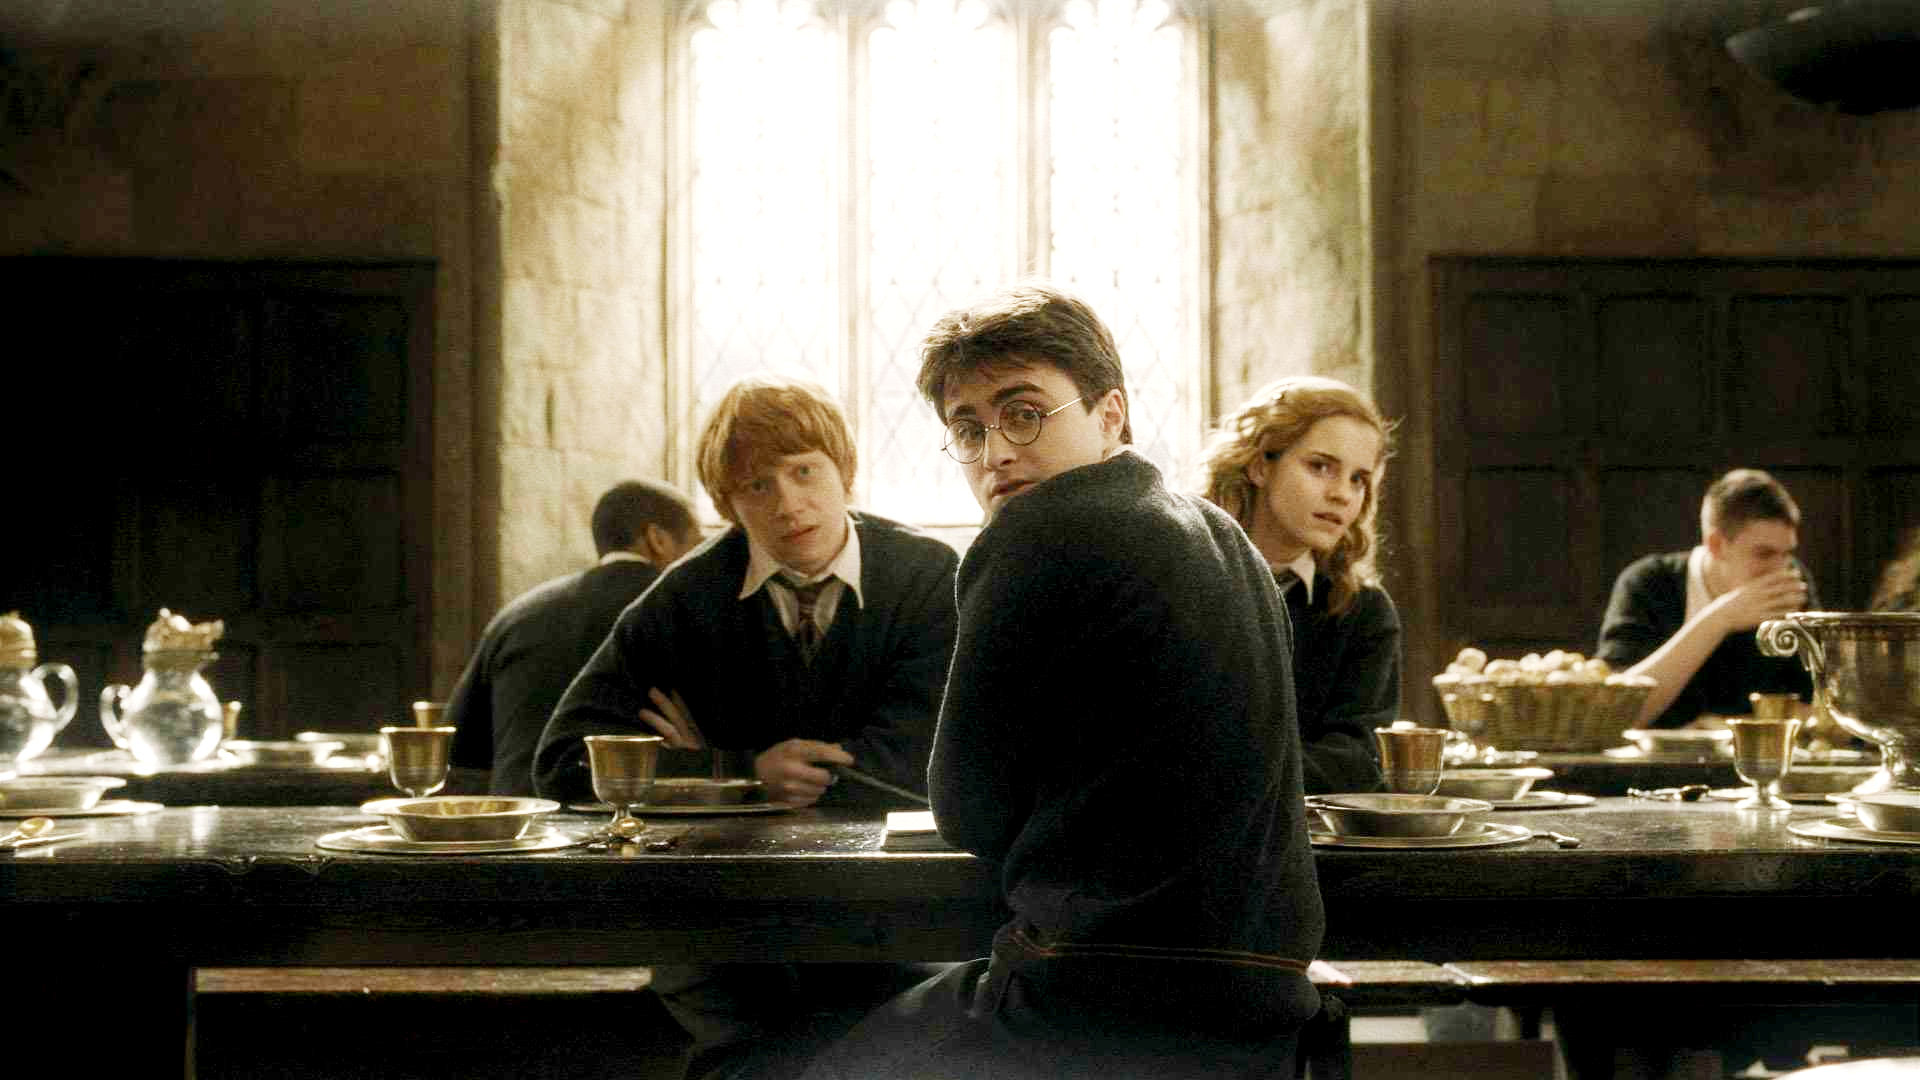 Rupert Grint, Daniel Radcliffe and Emma Watson in Warner Bros Pictures' Harry Potter and the Half-Blood Prince (2009)